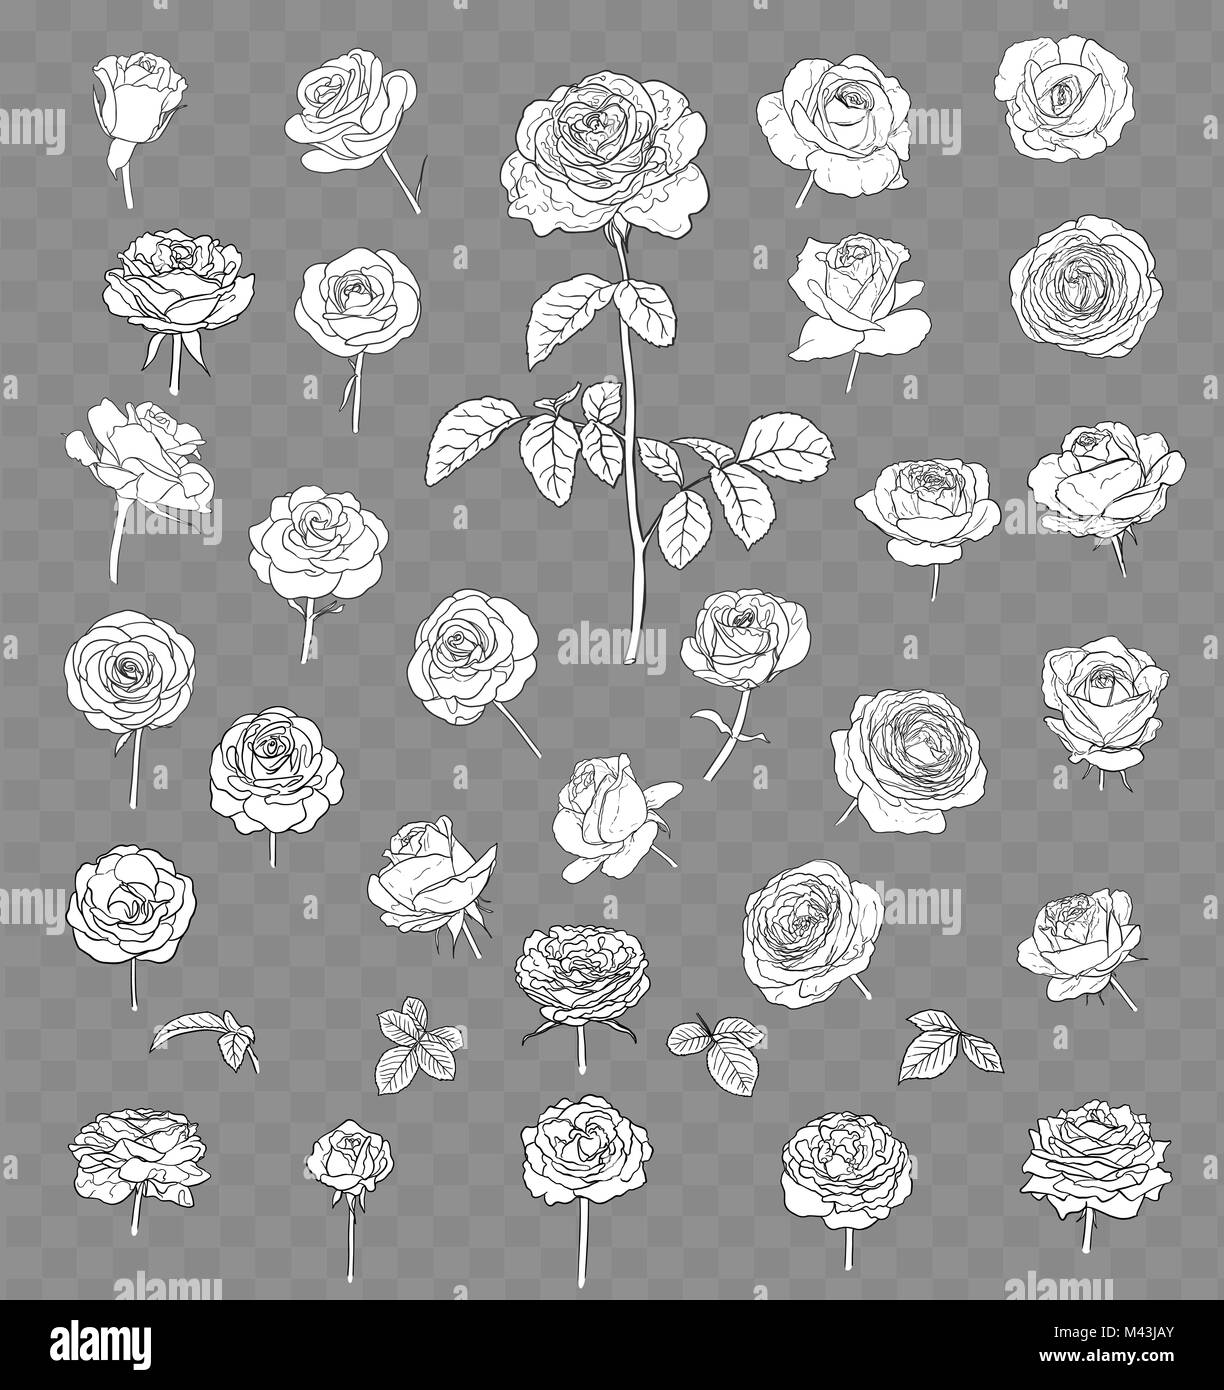 rose drawing set isolated on transparent background. hand drawn  Stock Vector